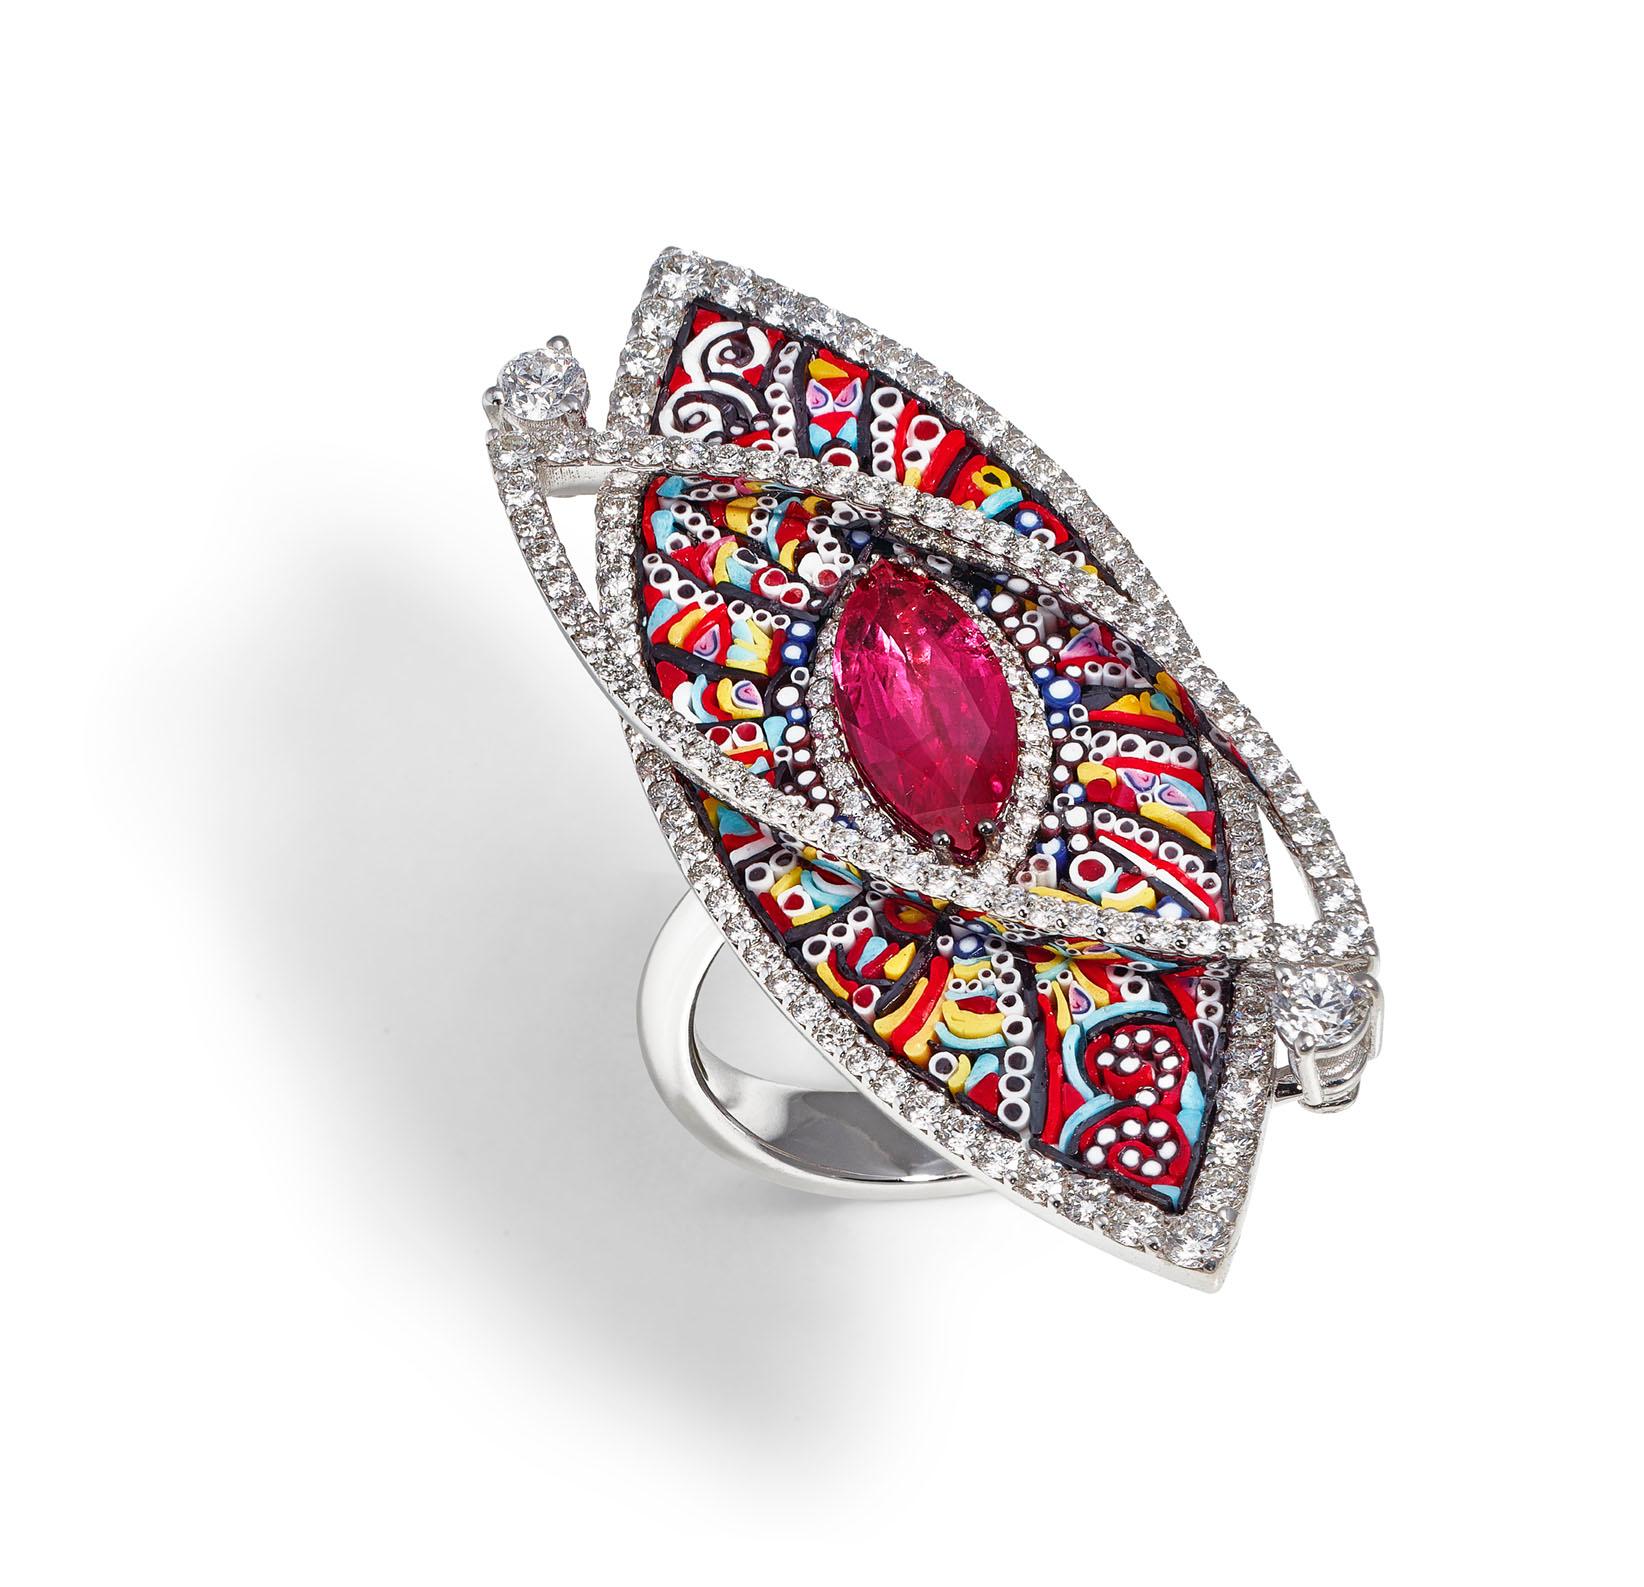 Marquise Cut Cocktail Ring White Gold White Diamonds Ruby Hand Decorated with Micromosaic For Sale